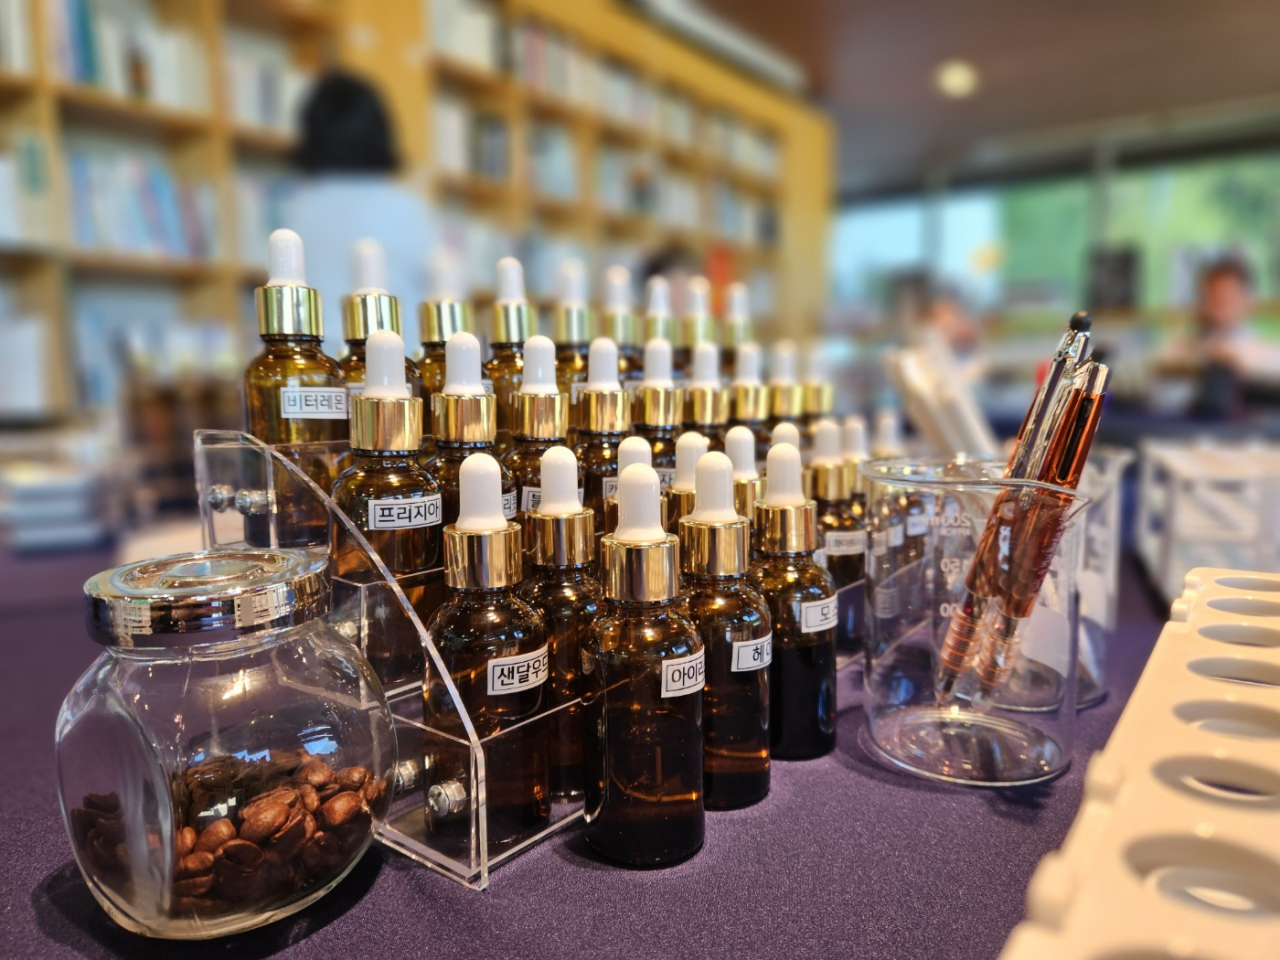 Different scents are on display at the High1 Wellness Center. (Kim Hae-yeon/ The Korea Herald)